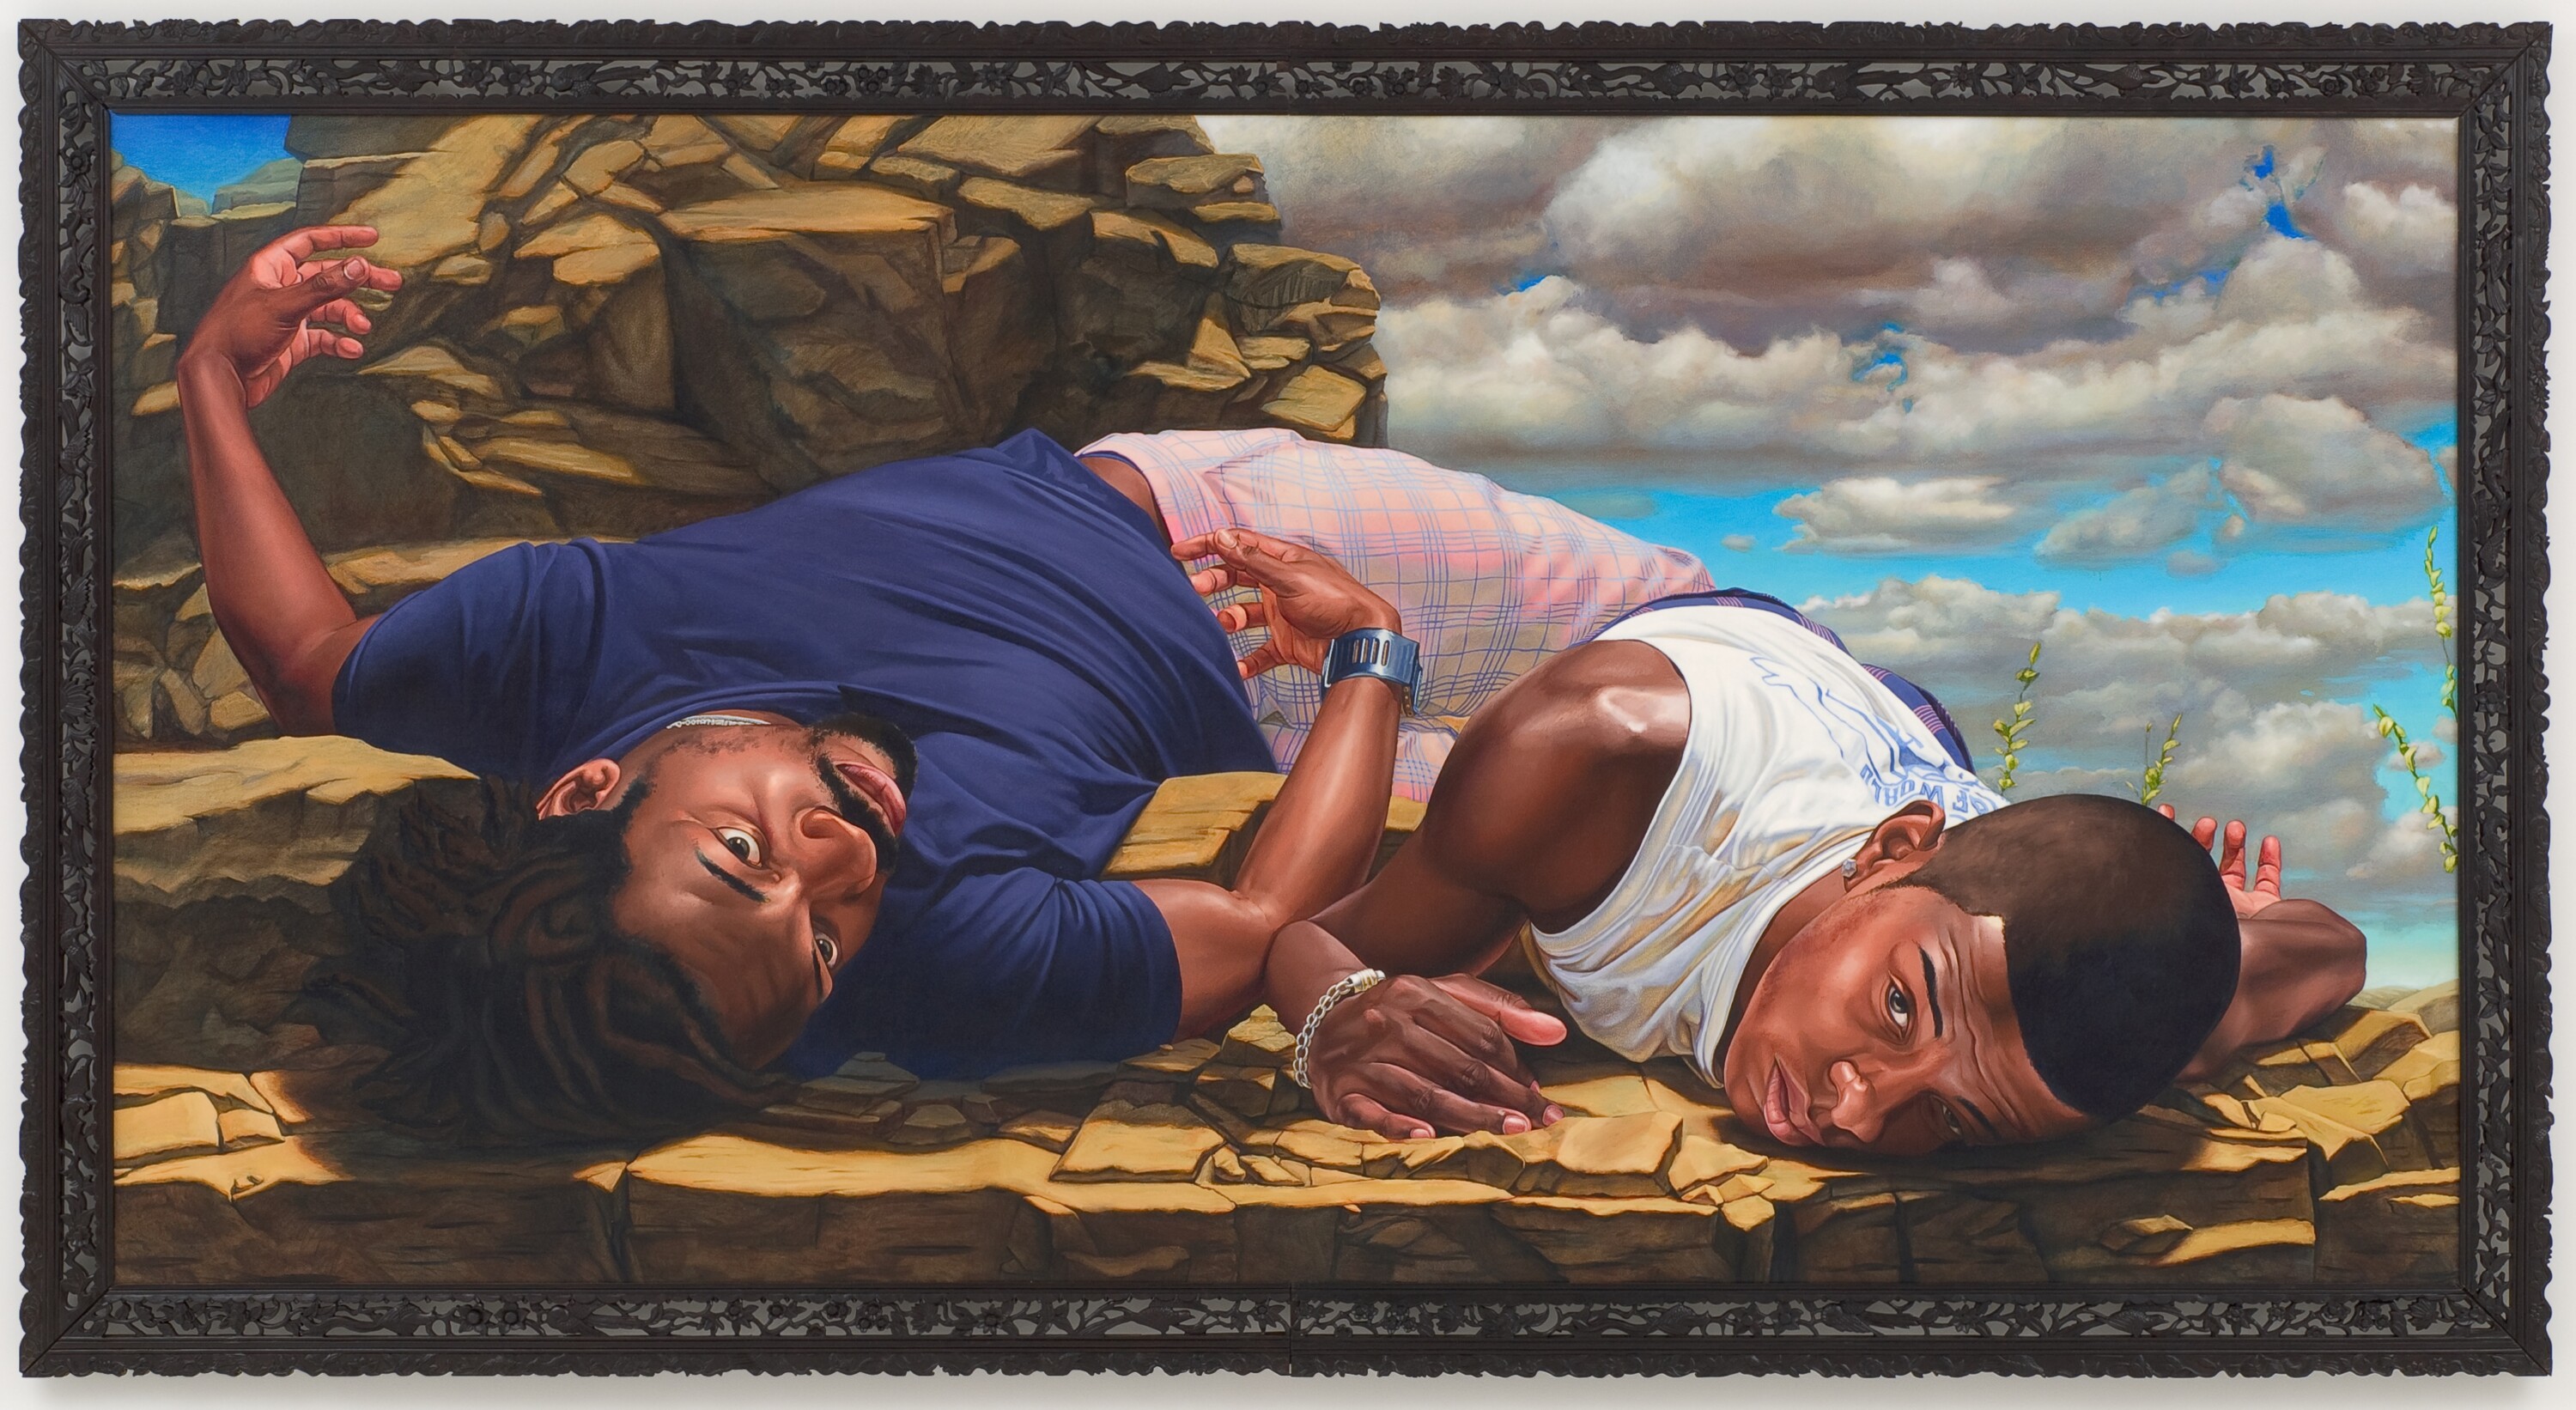 kehindewiley_a new republic_Santos_Dumont-The_Father_of_Aviation_II